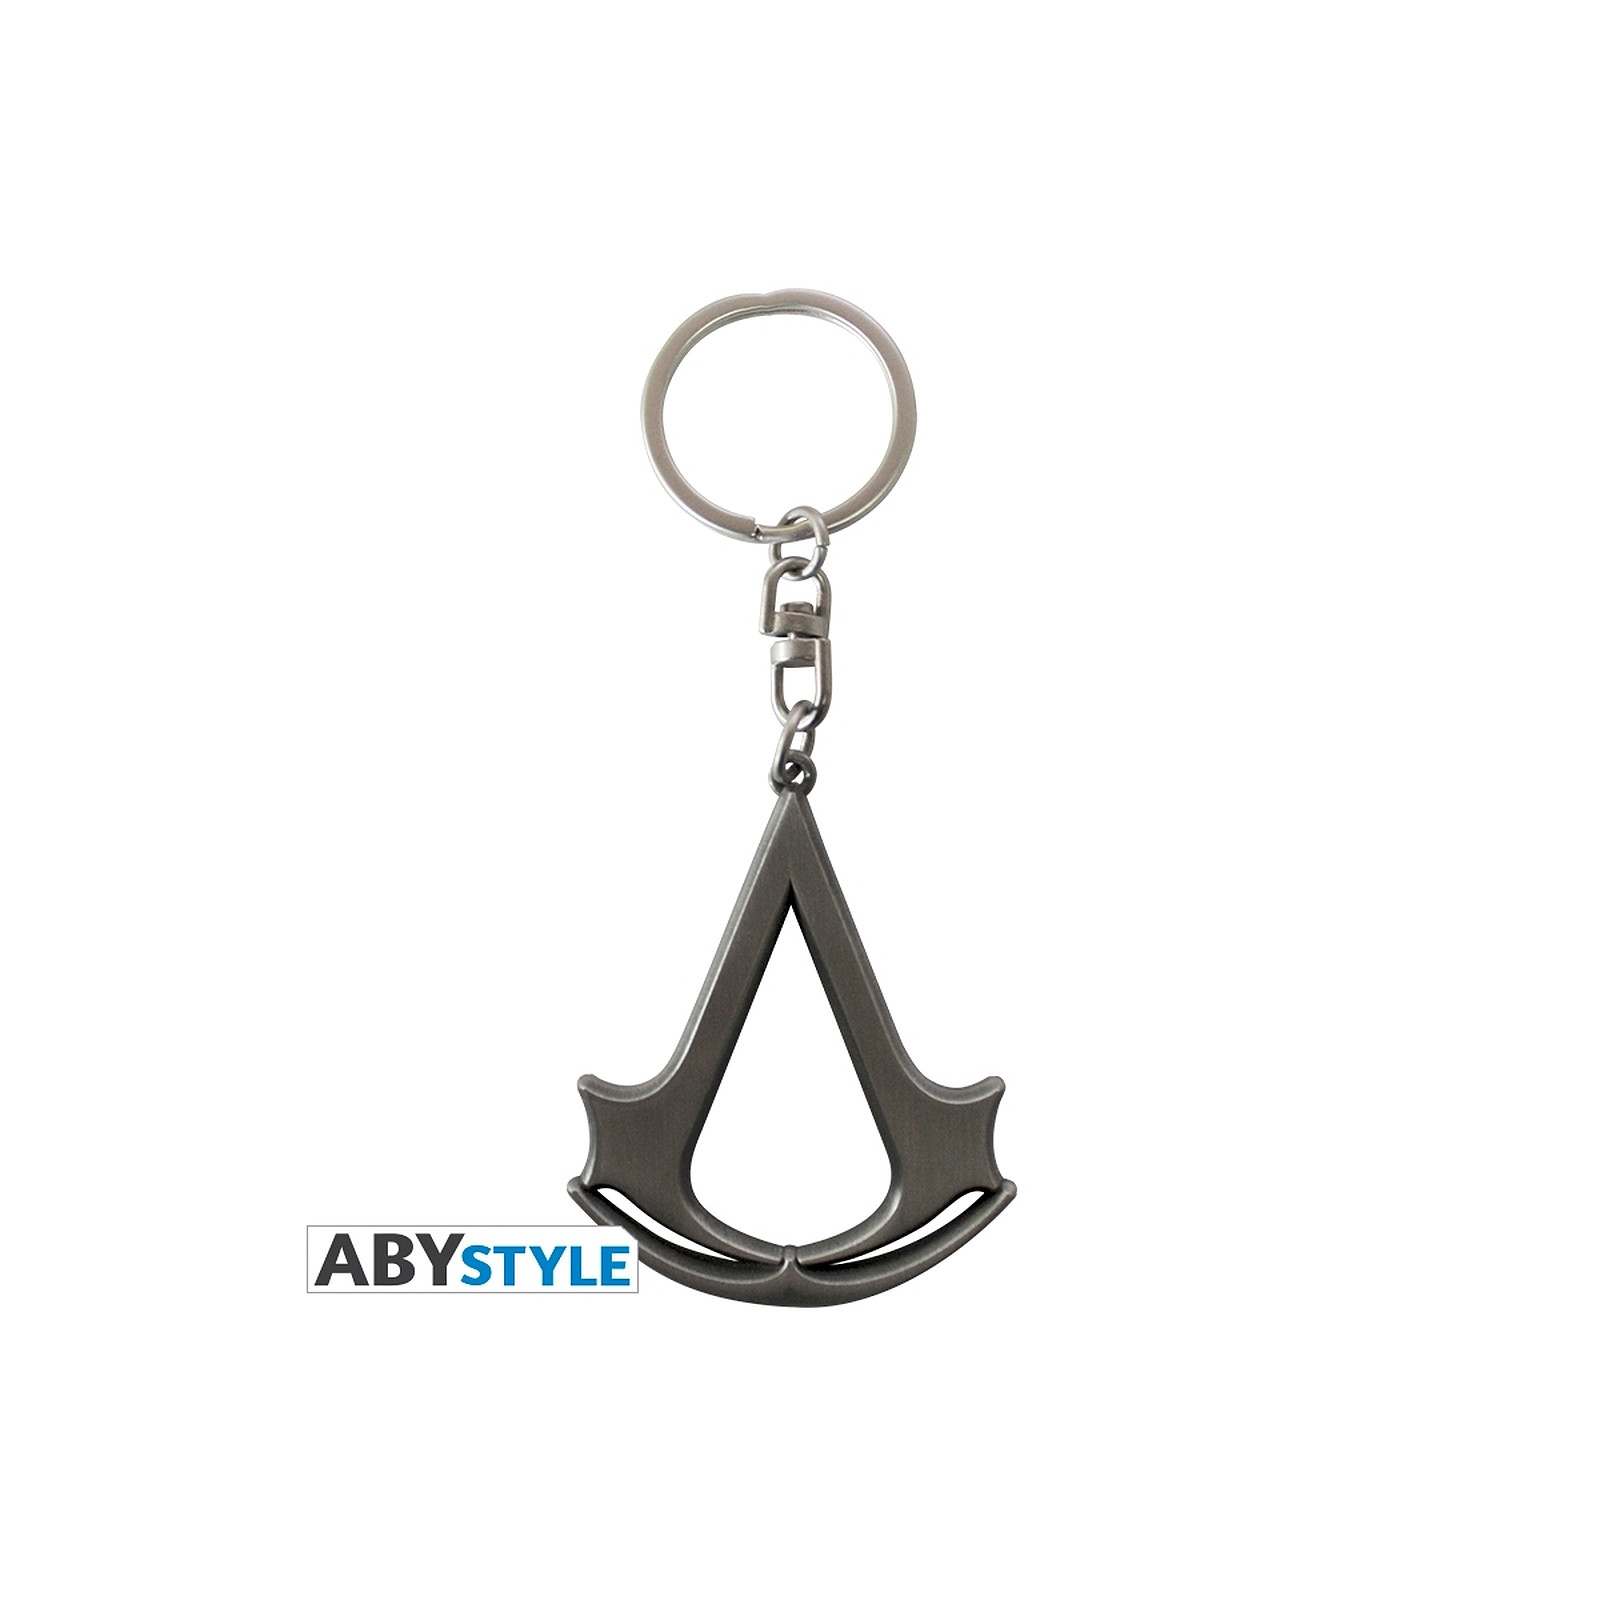 Assassin's Creed - Porte-cles 3D Crest - Porte-cles Abystyle